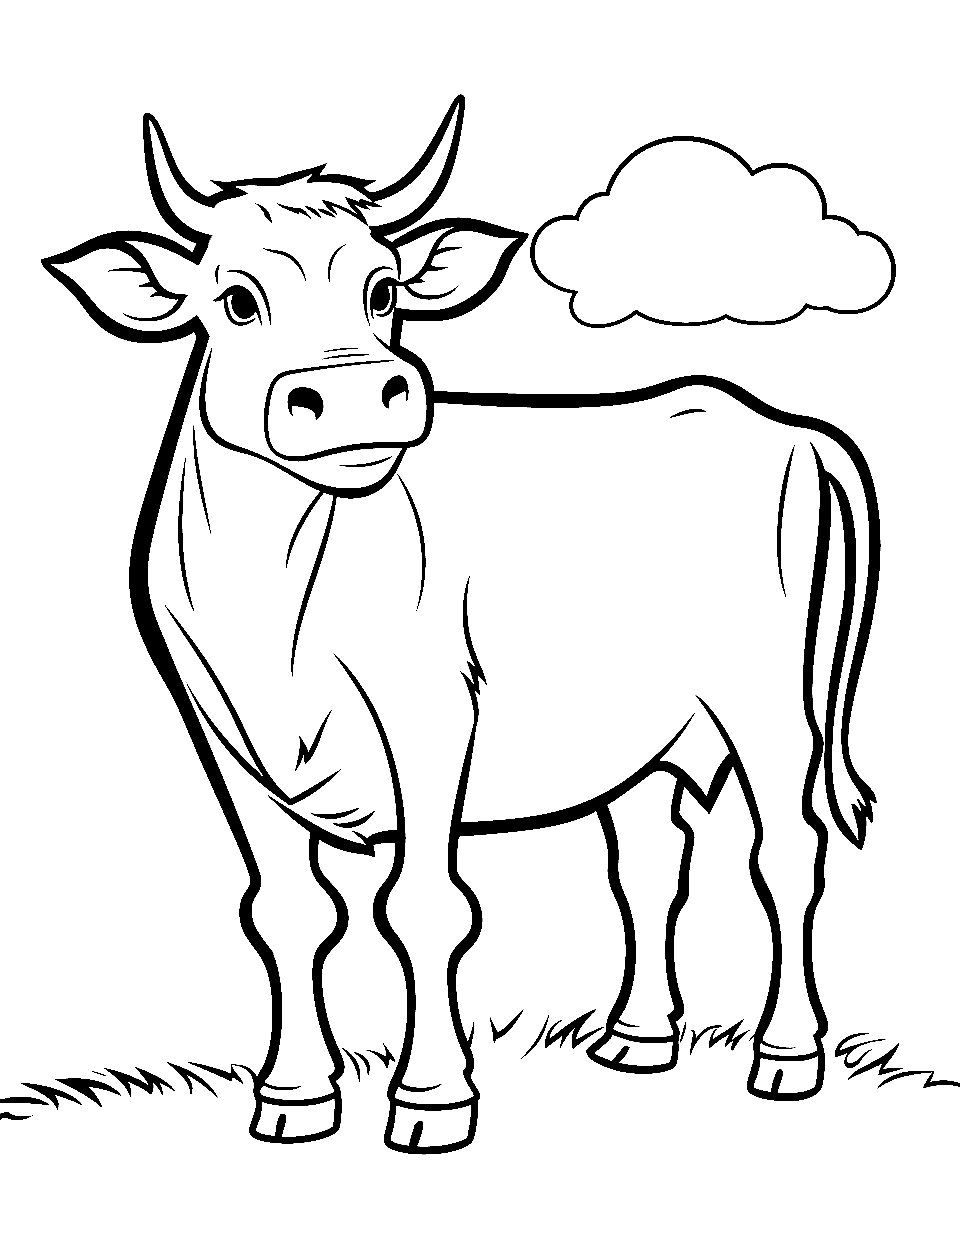 Large, Happy Cow Coloring Page - A large Happy simple to draw cow on a modest patch of grass.